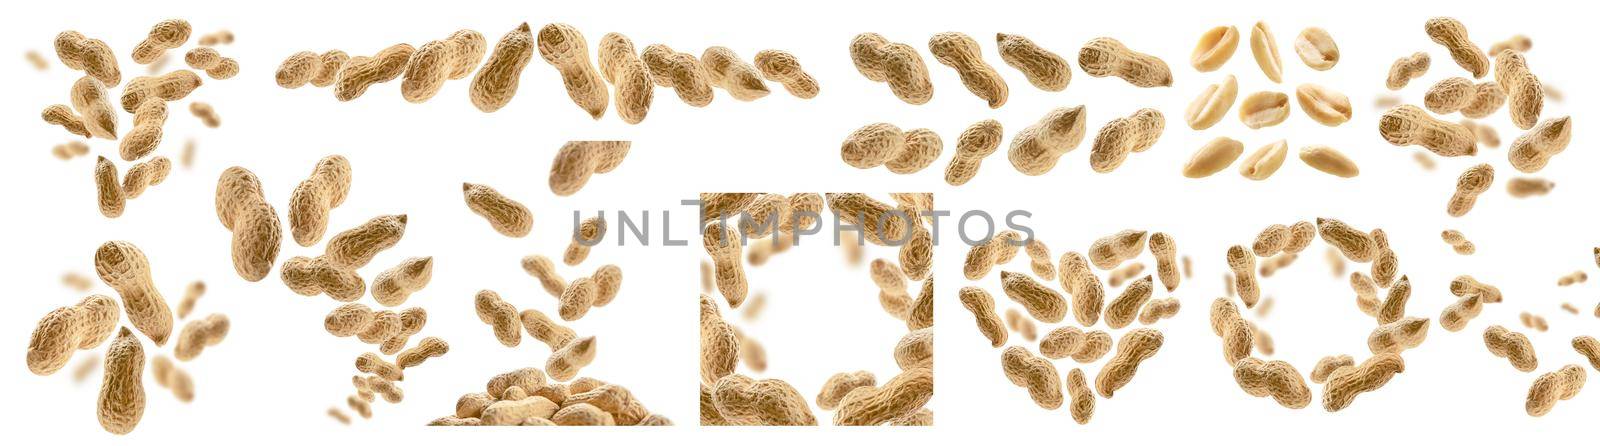 A set of photos. Peanuts in the shell levitate on a white background.